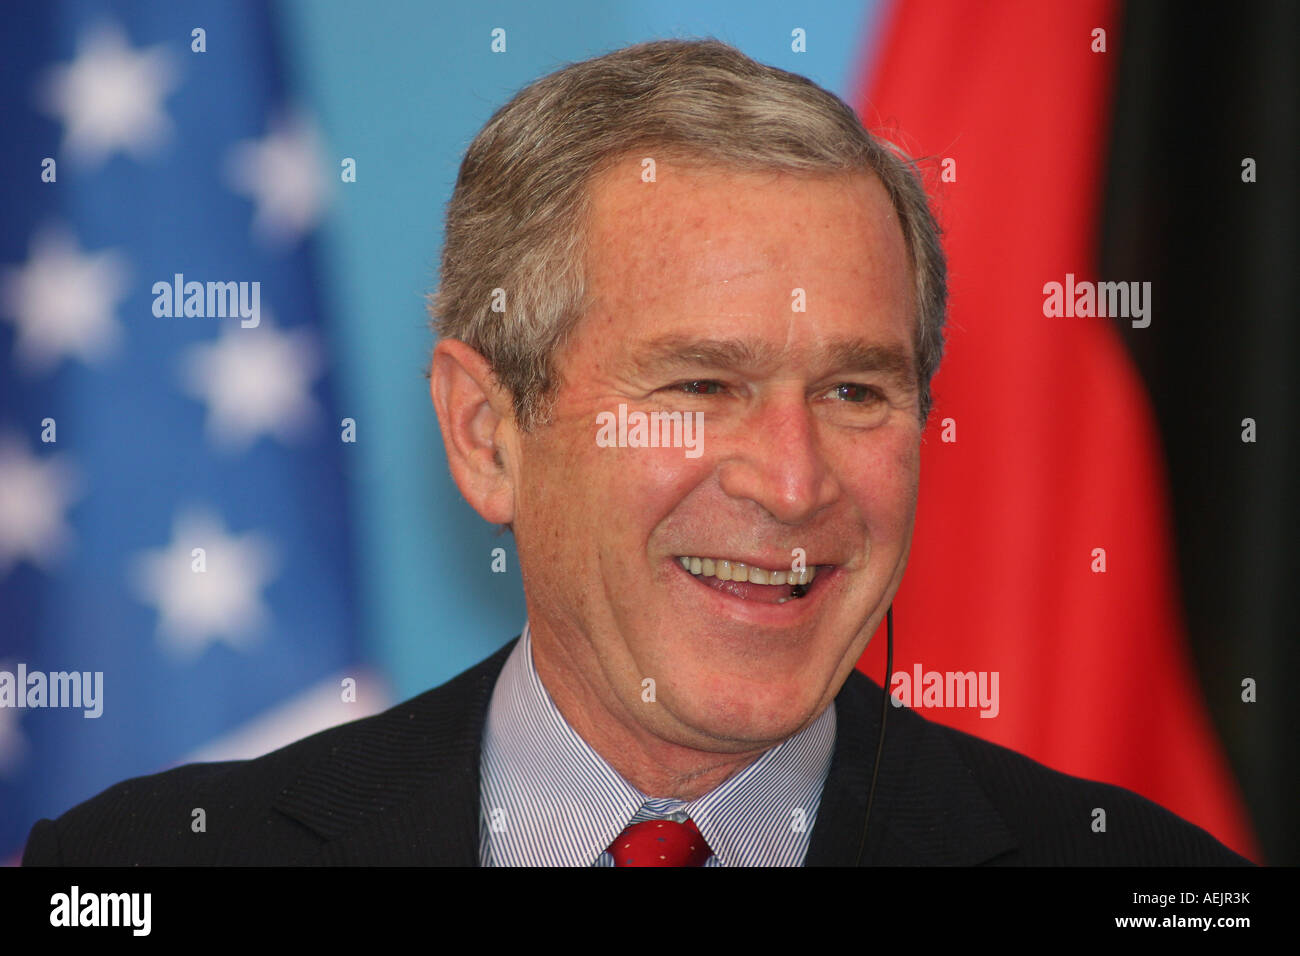 President of the united states of America George W. Bush Stock Photo